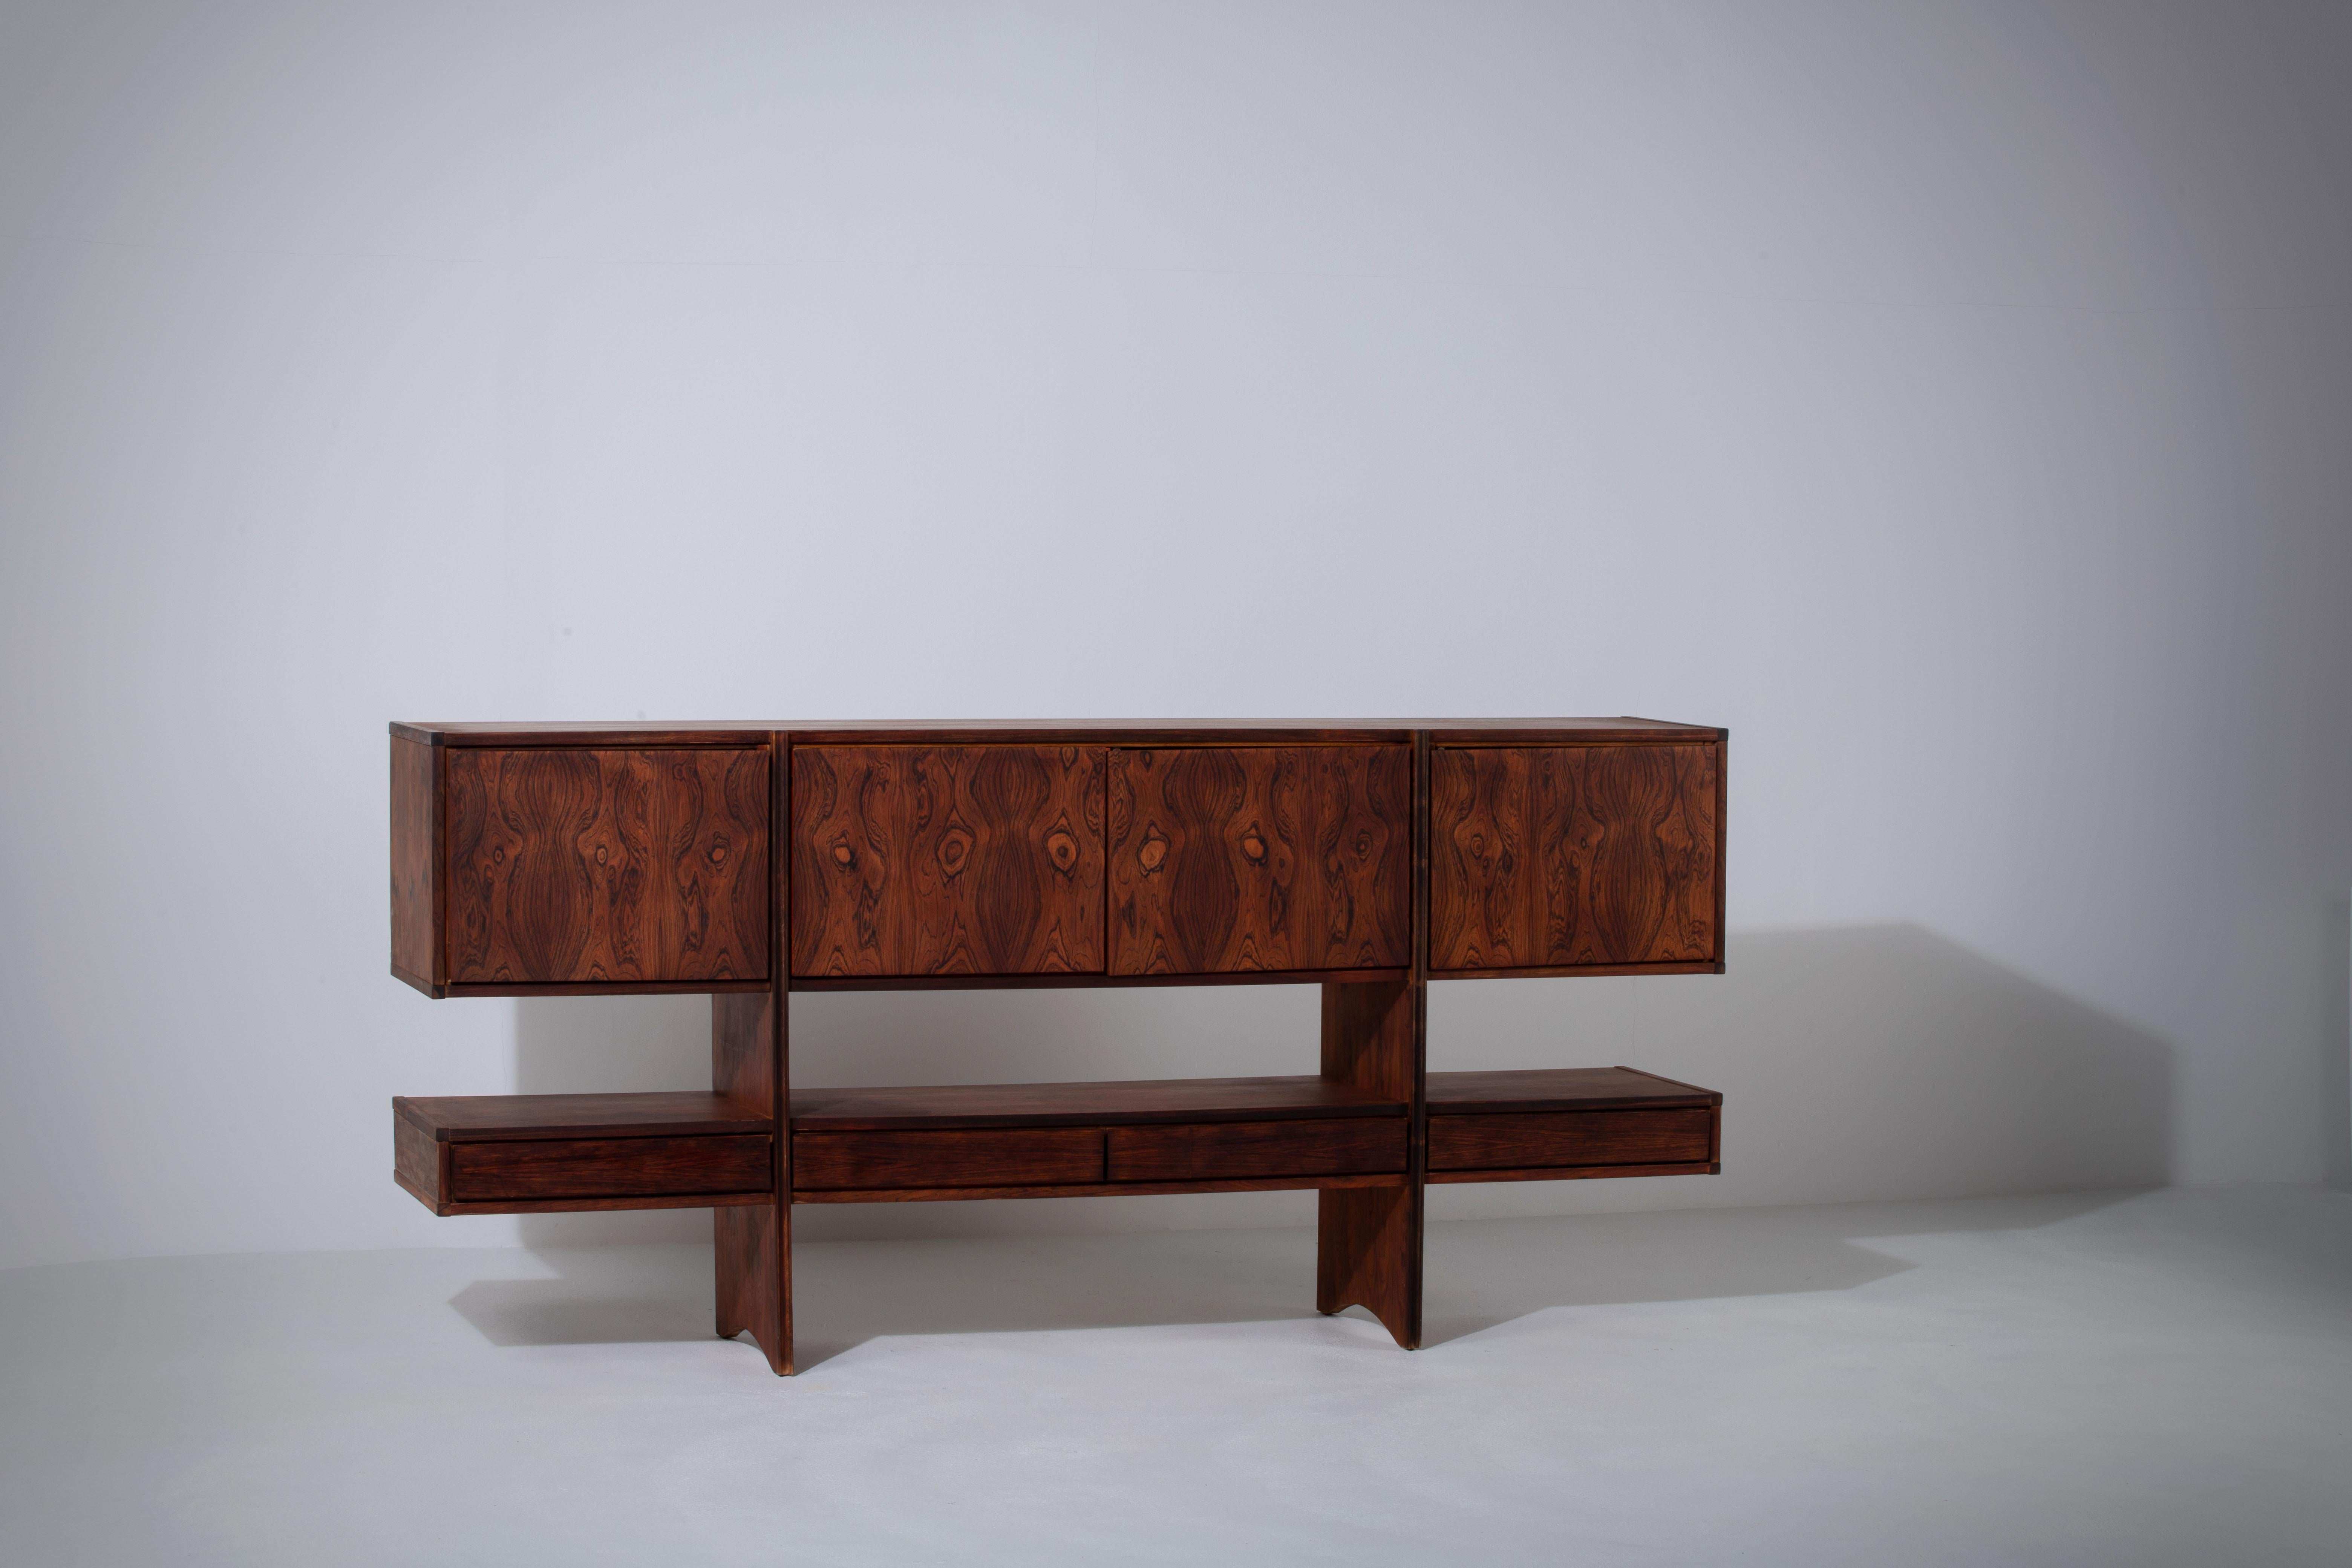 Superb midcentury palisander sideboard. Four drawers and four doors. The sideboard is made of two long sideboards superposed in a full palisander structure.
The integrated handles reinforce the minimalism and the airy aspect of this piece. 
Good